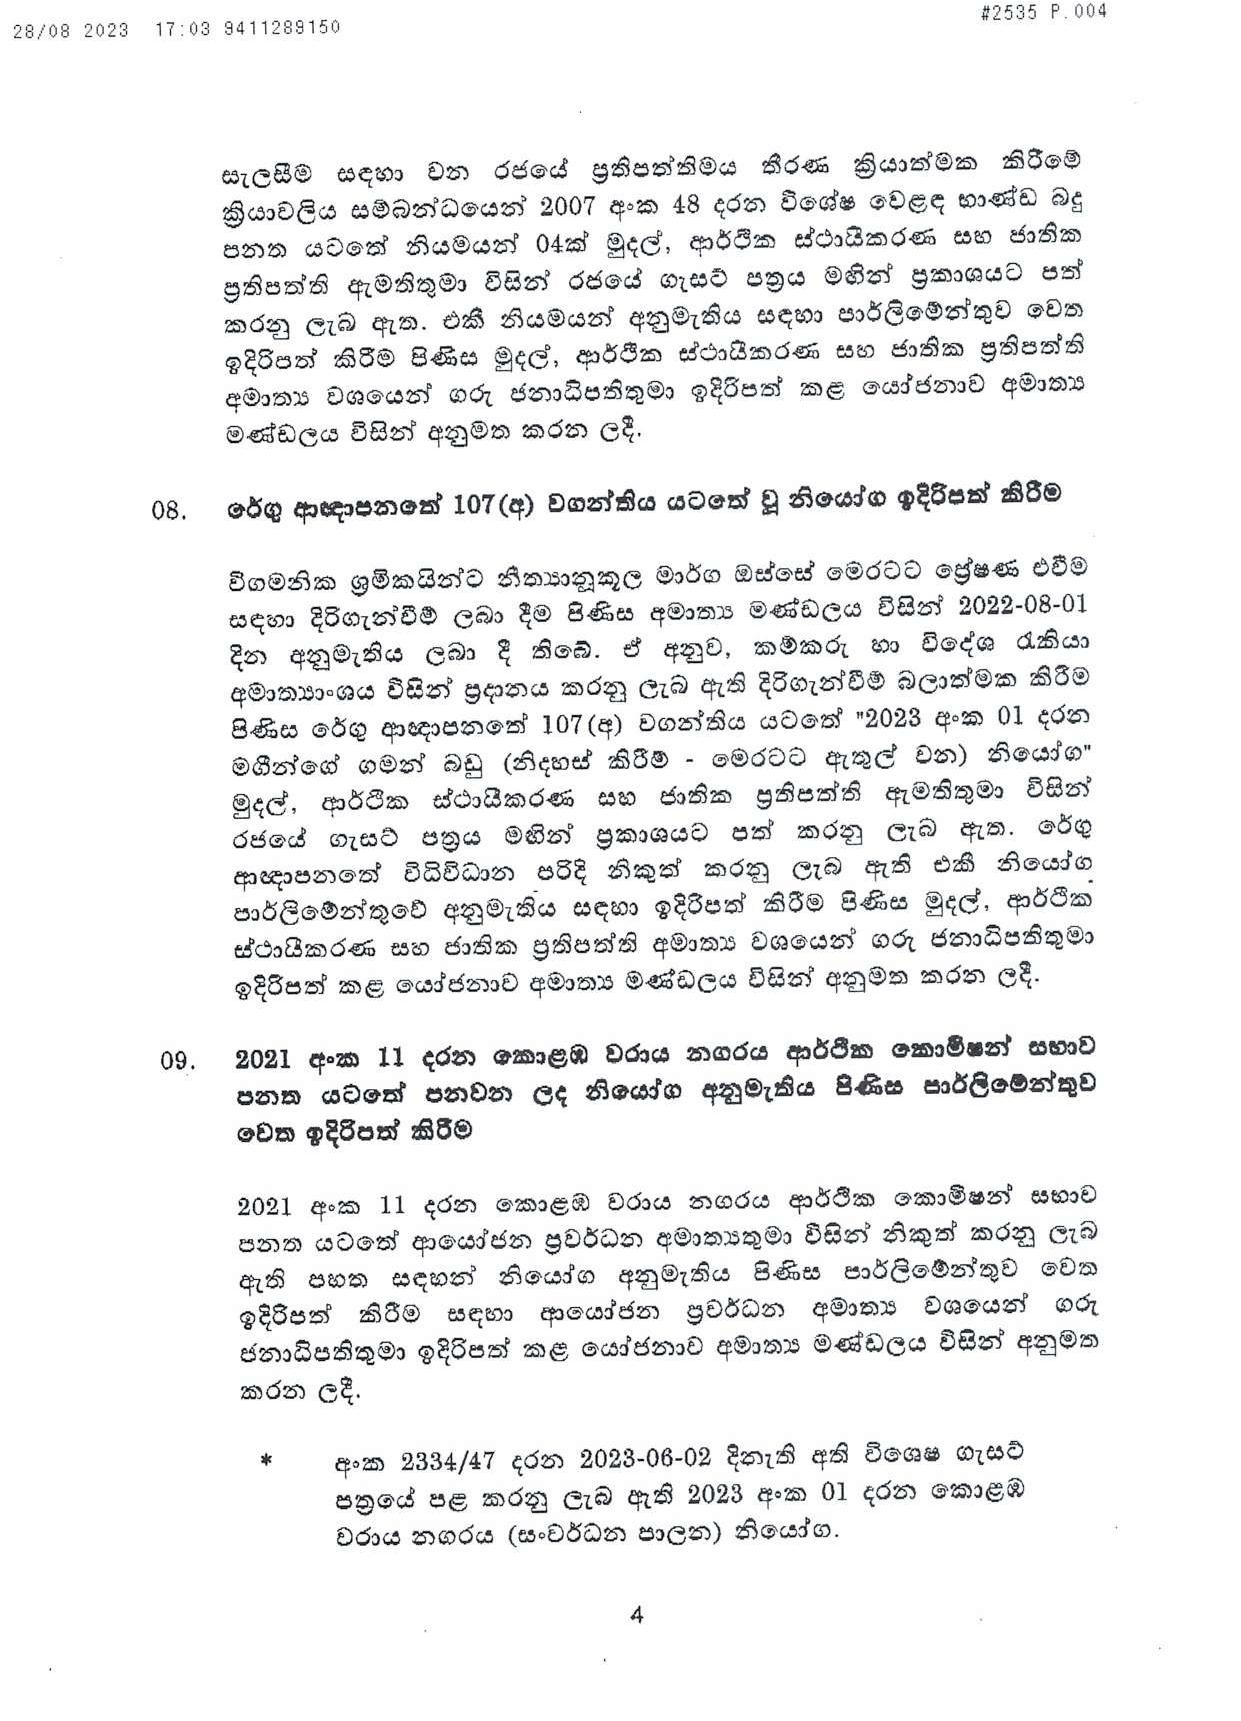 Cabinet Decision on 28.08.2023 1 page 004